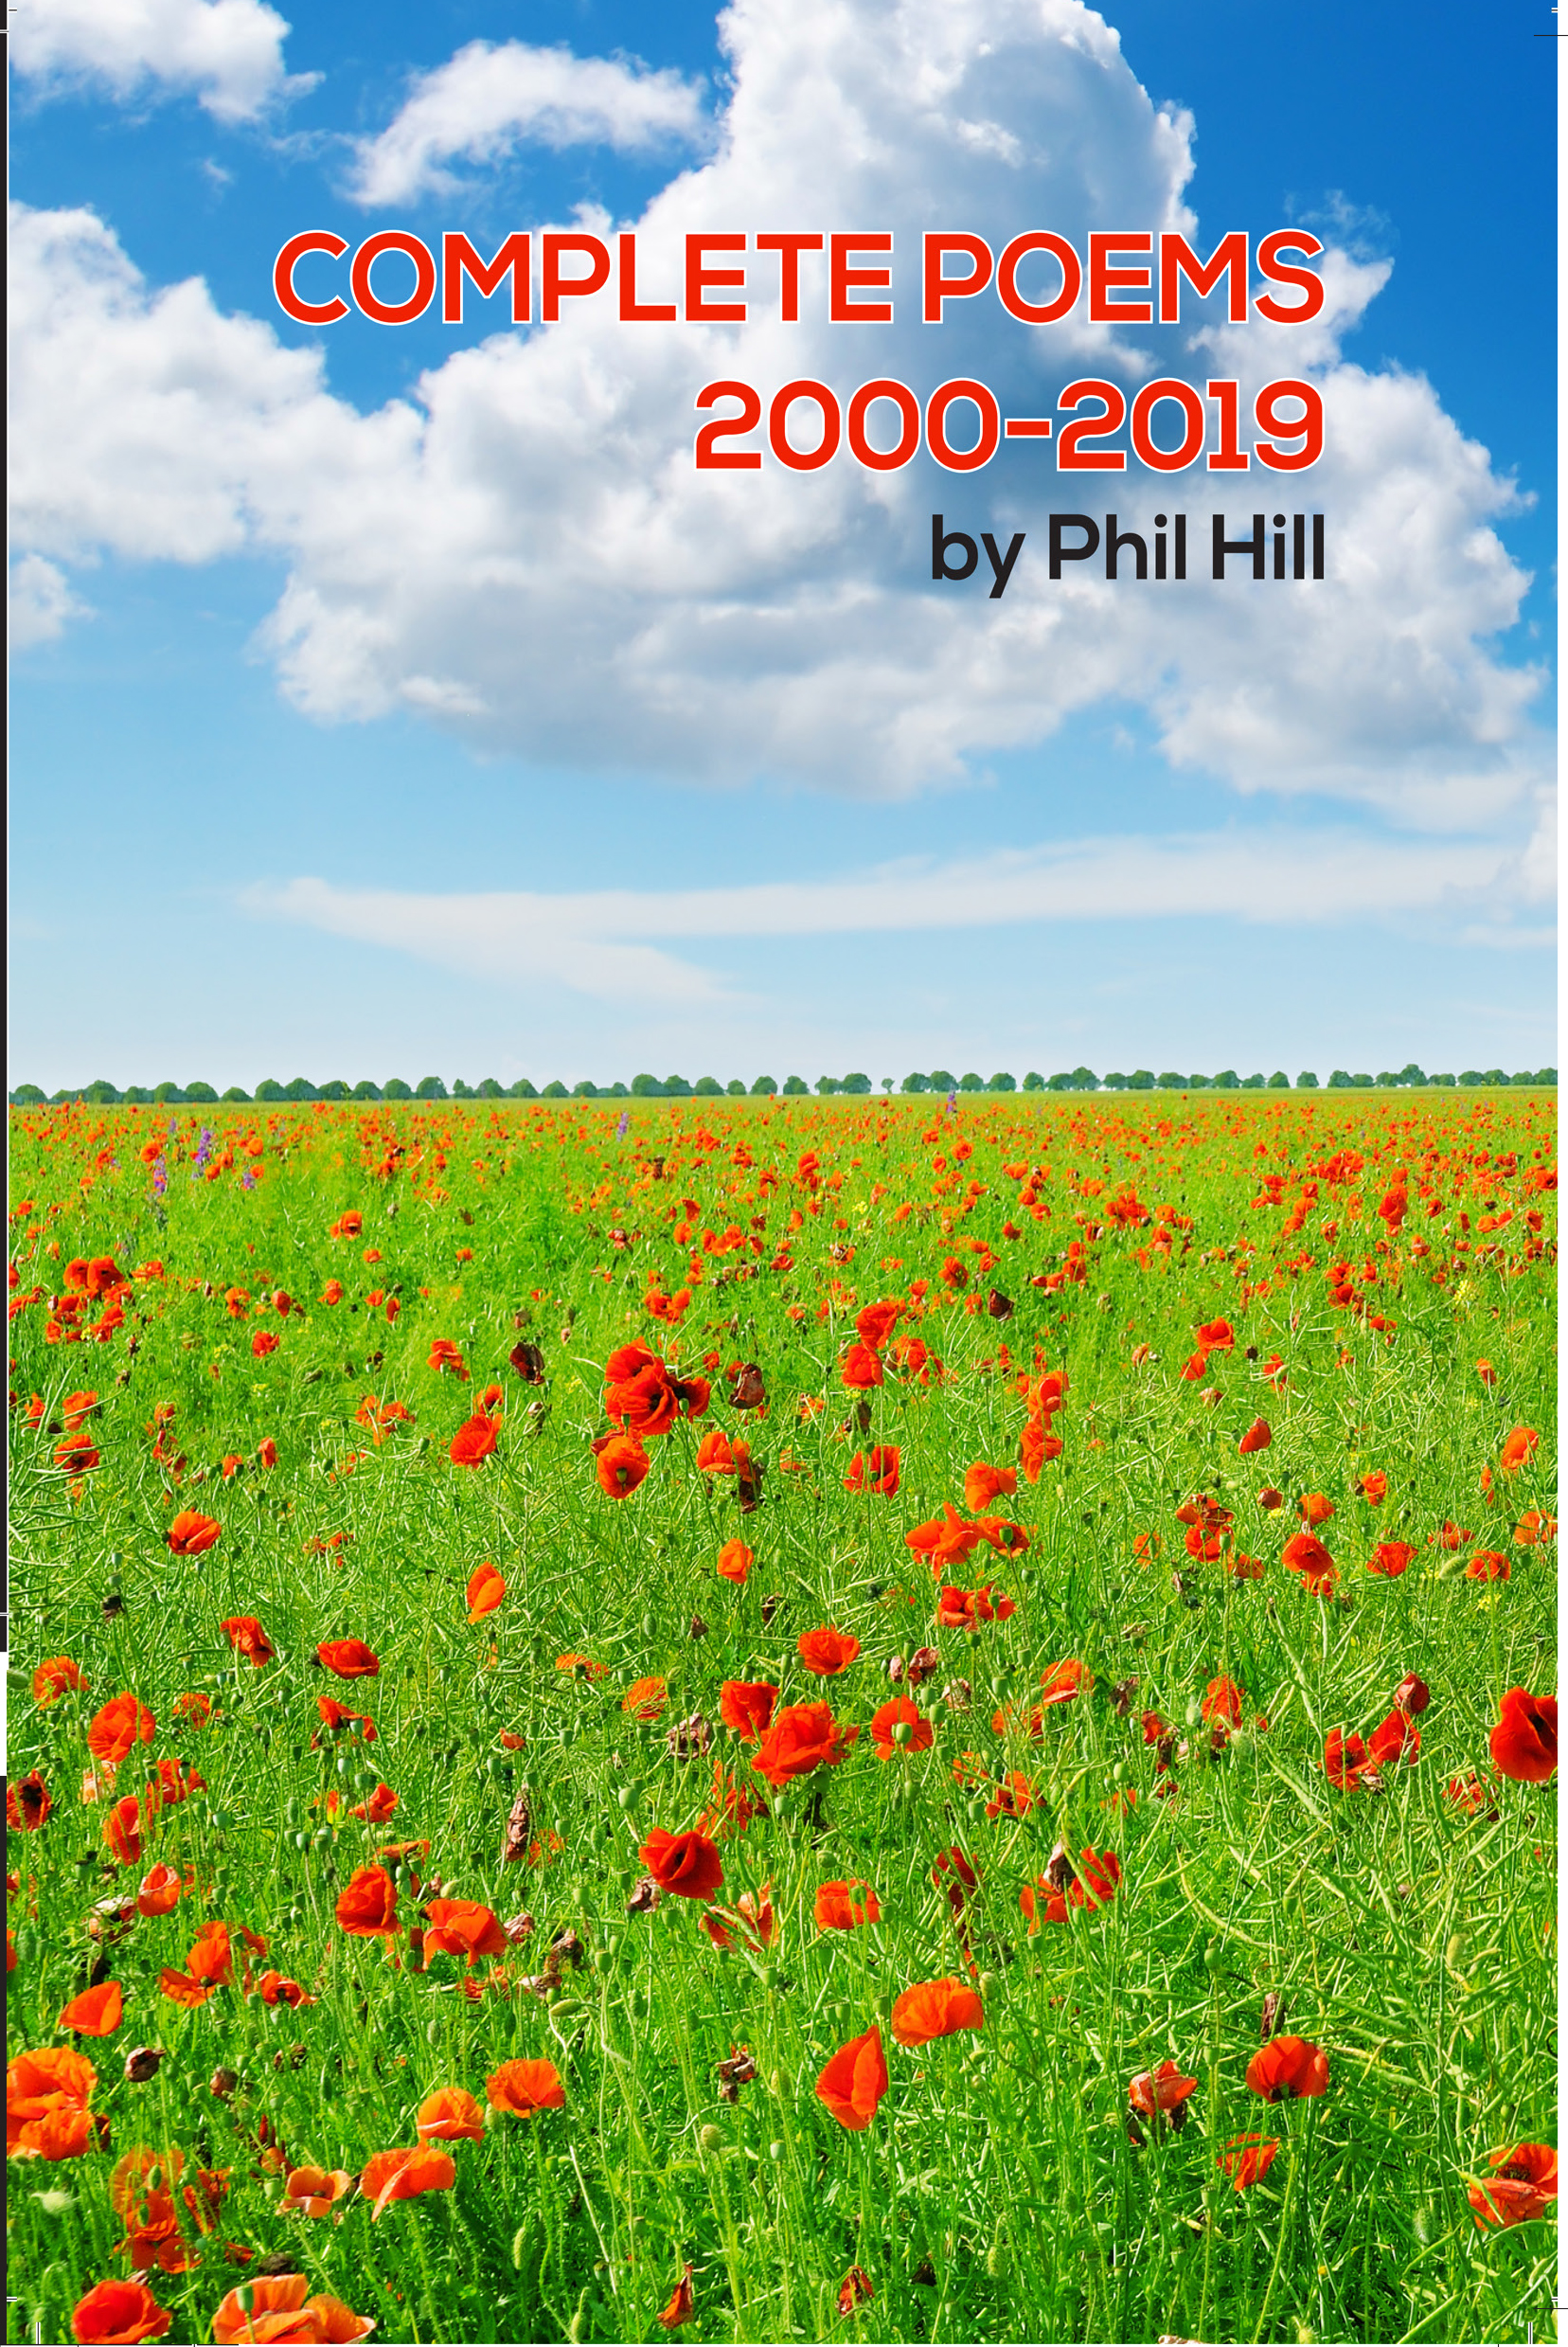 The collected poems of Phil Hill 2000 to 2019